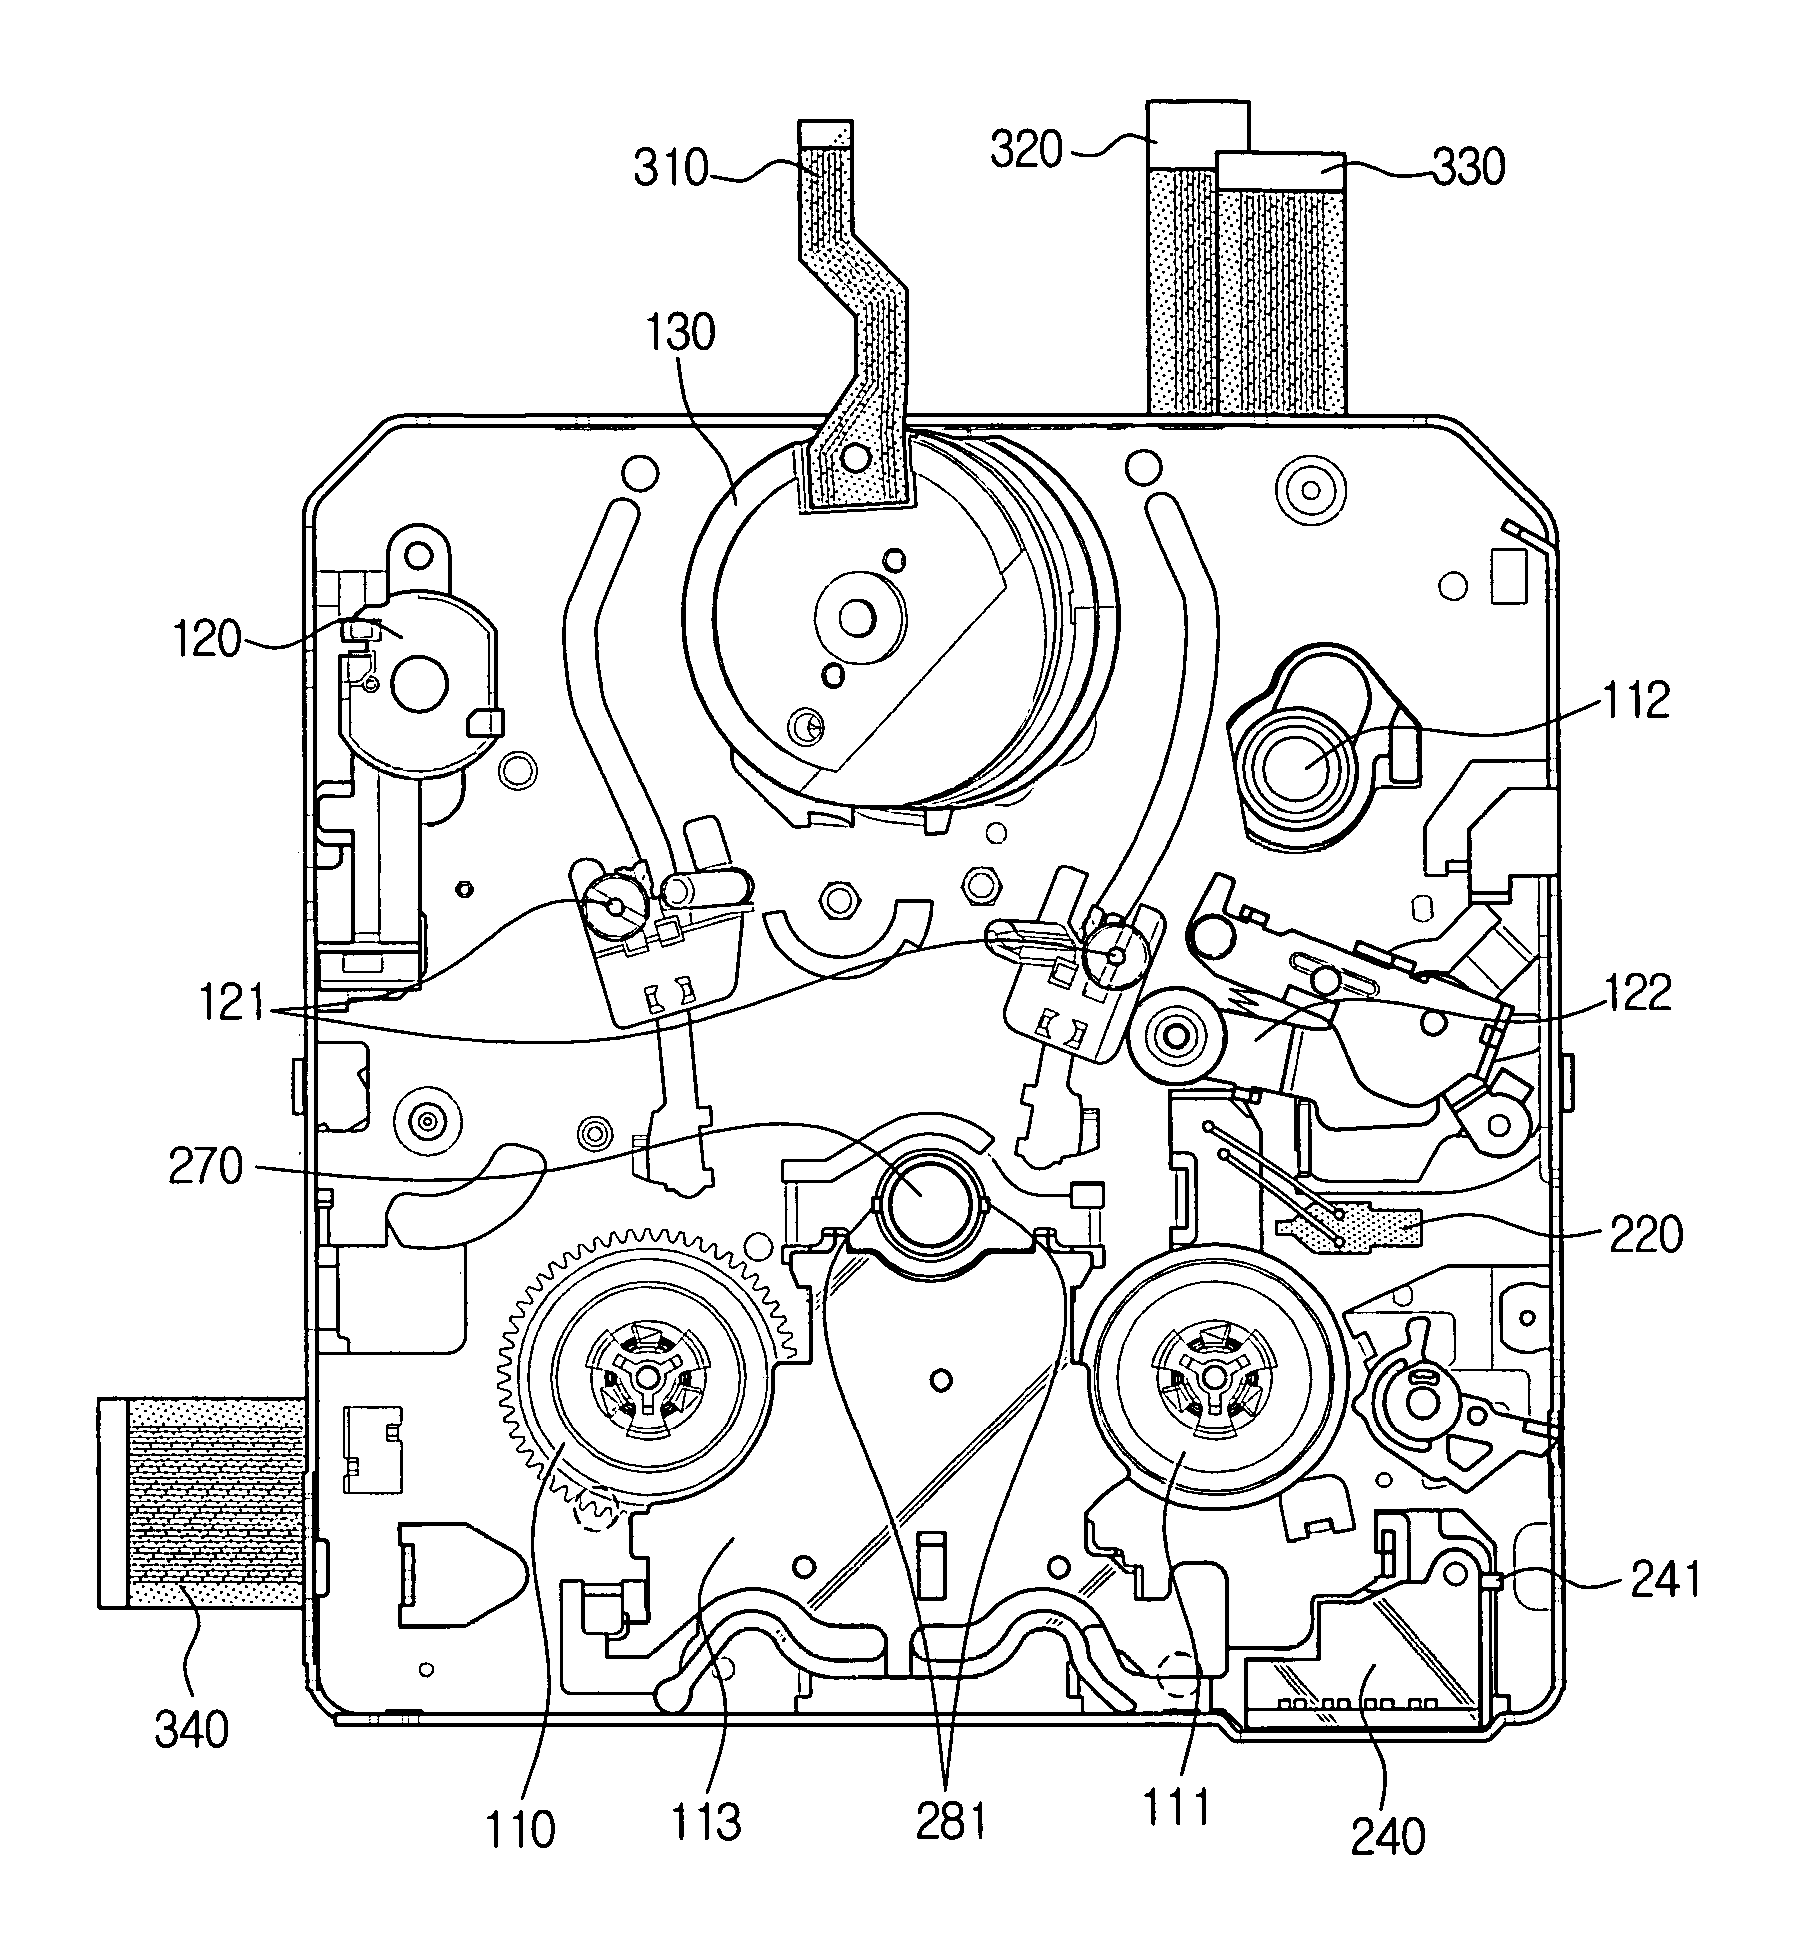 Deck for magnetic recording/reproducing apparatus